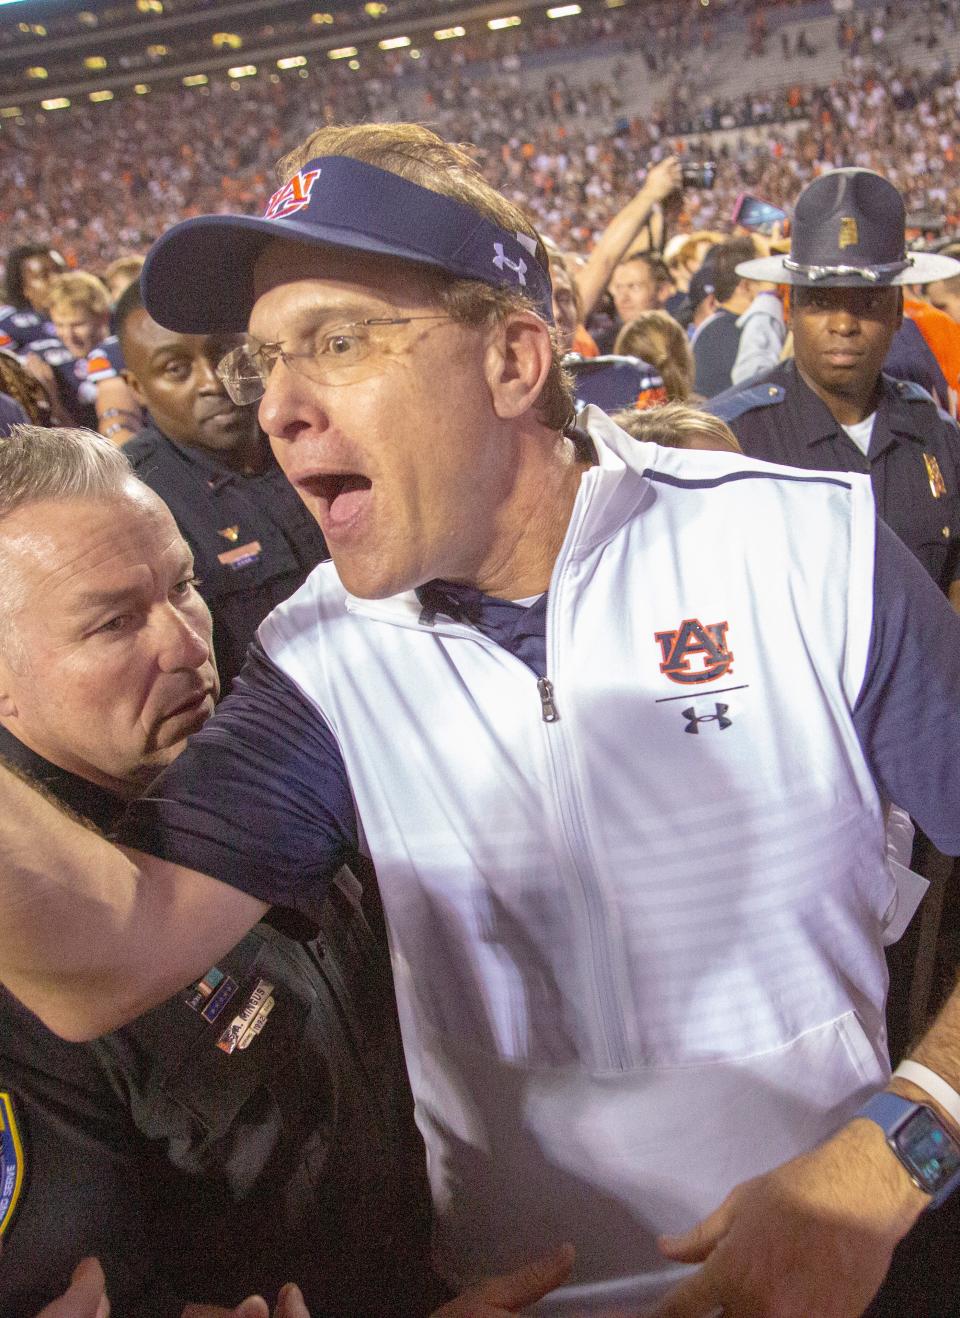 Auburn head coach Gus Malzahn shakes hands with fans after the Tigers defeated Alabama 48-45 in the 2019 Iron Bowl.